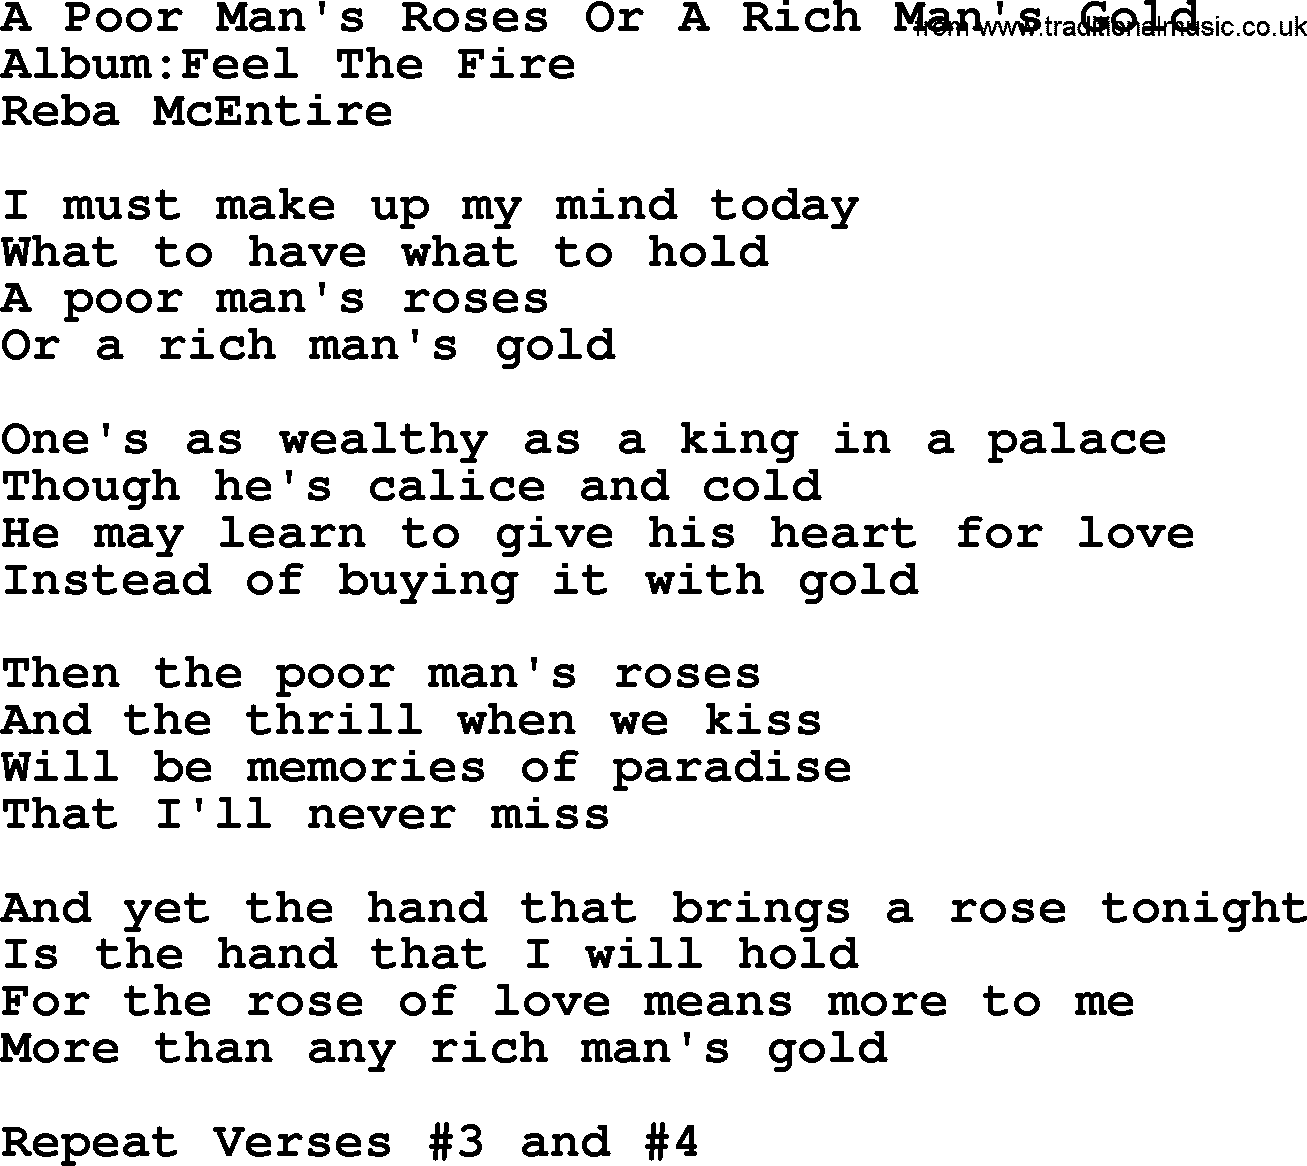 Reba McEntire song: A Poor Man's Roses Or A Rich Man's Gold lyrics